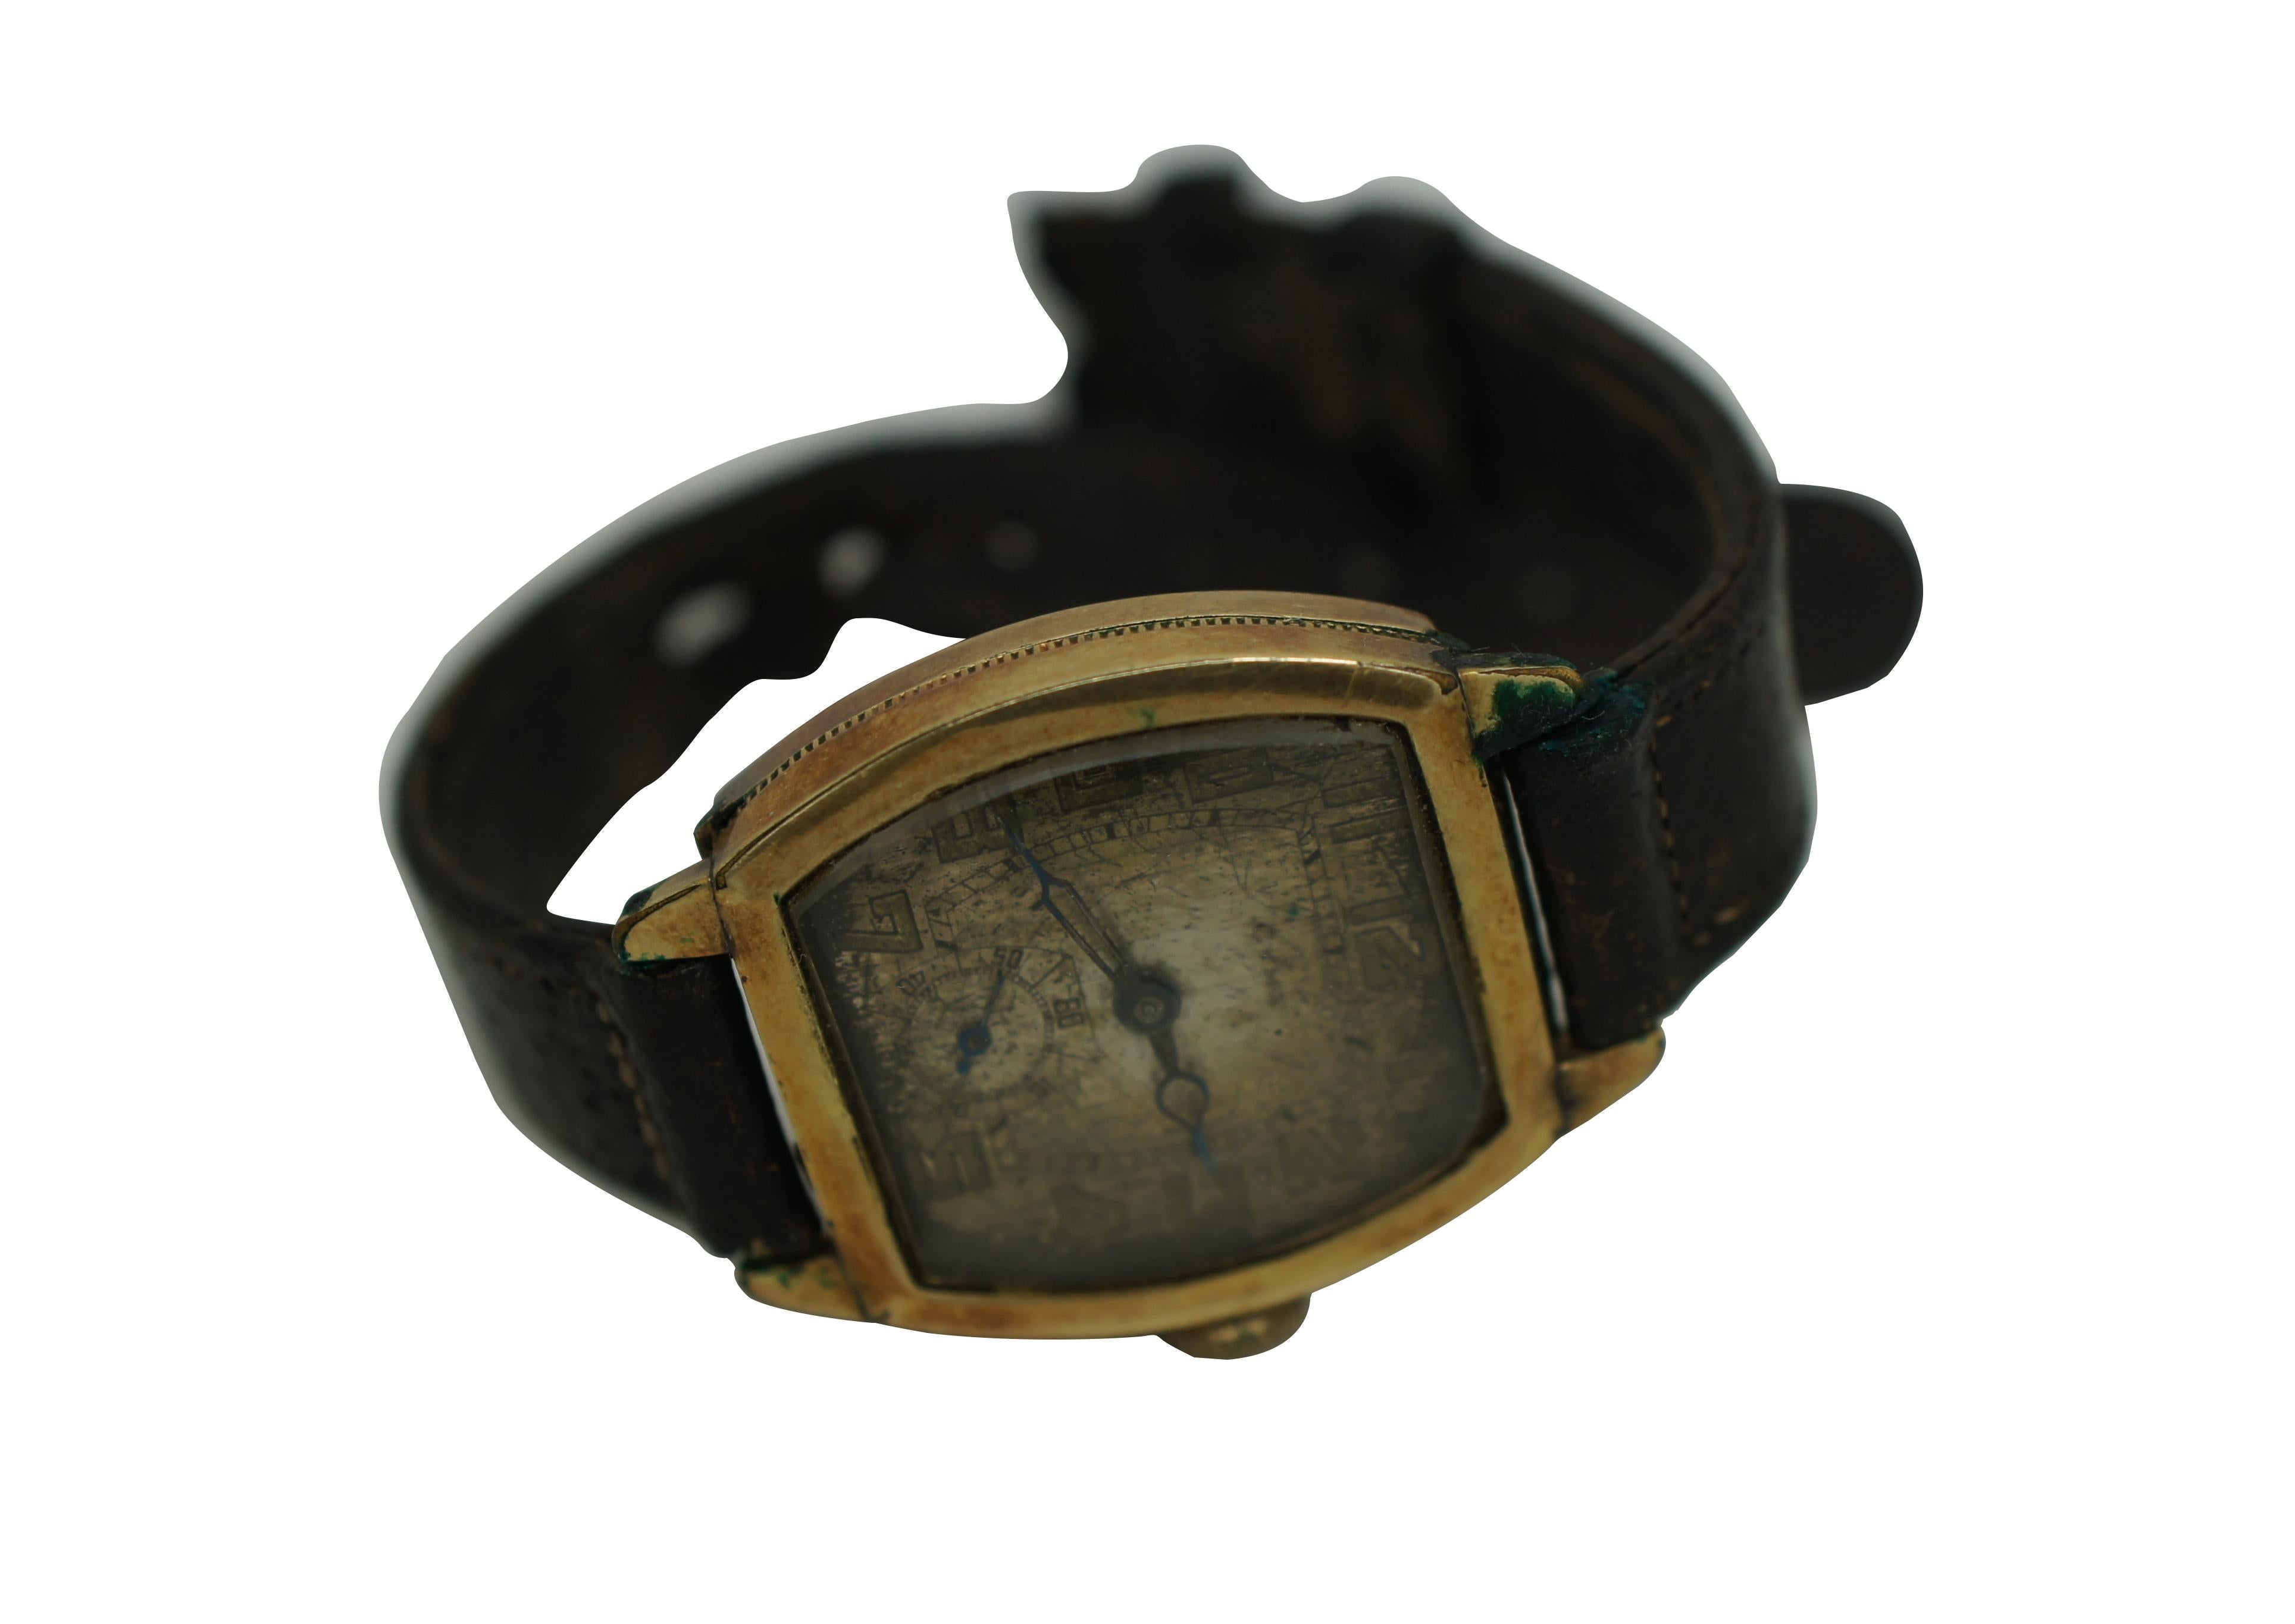 Antique early to Mid-20th Century Cyma / Tacy Watch Co 15 Jewel wrist watch produced by Tavannes Watch Co. Stellar case by Star Watch Case Company, 0 ½ Ligne, numbered 7253188. Brown leather band.

“Cyma and Tacy are 